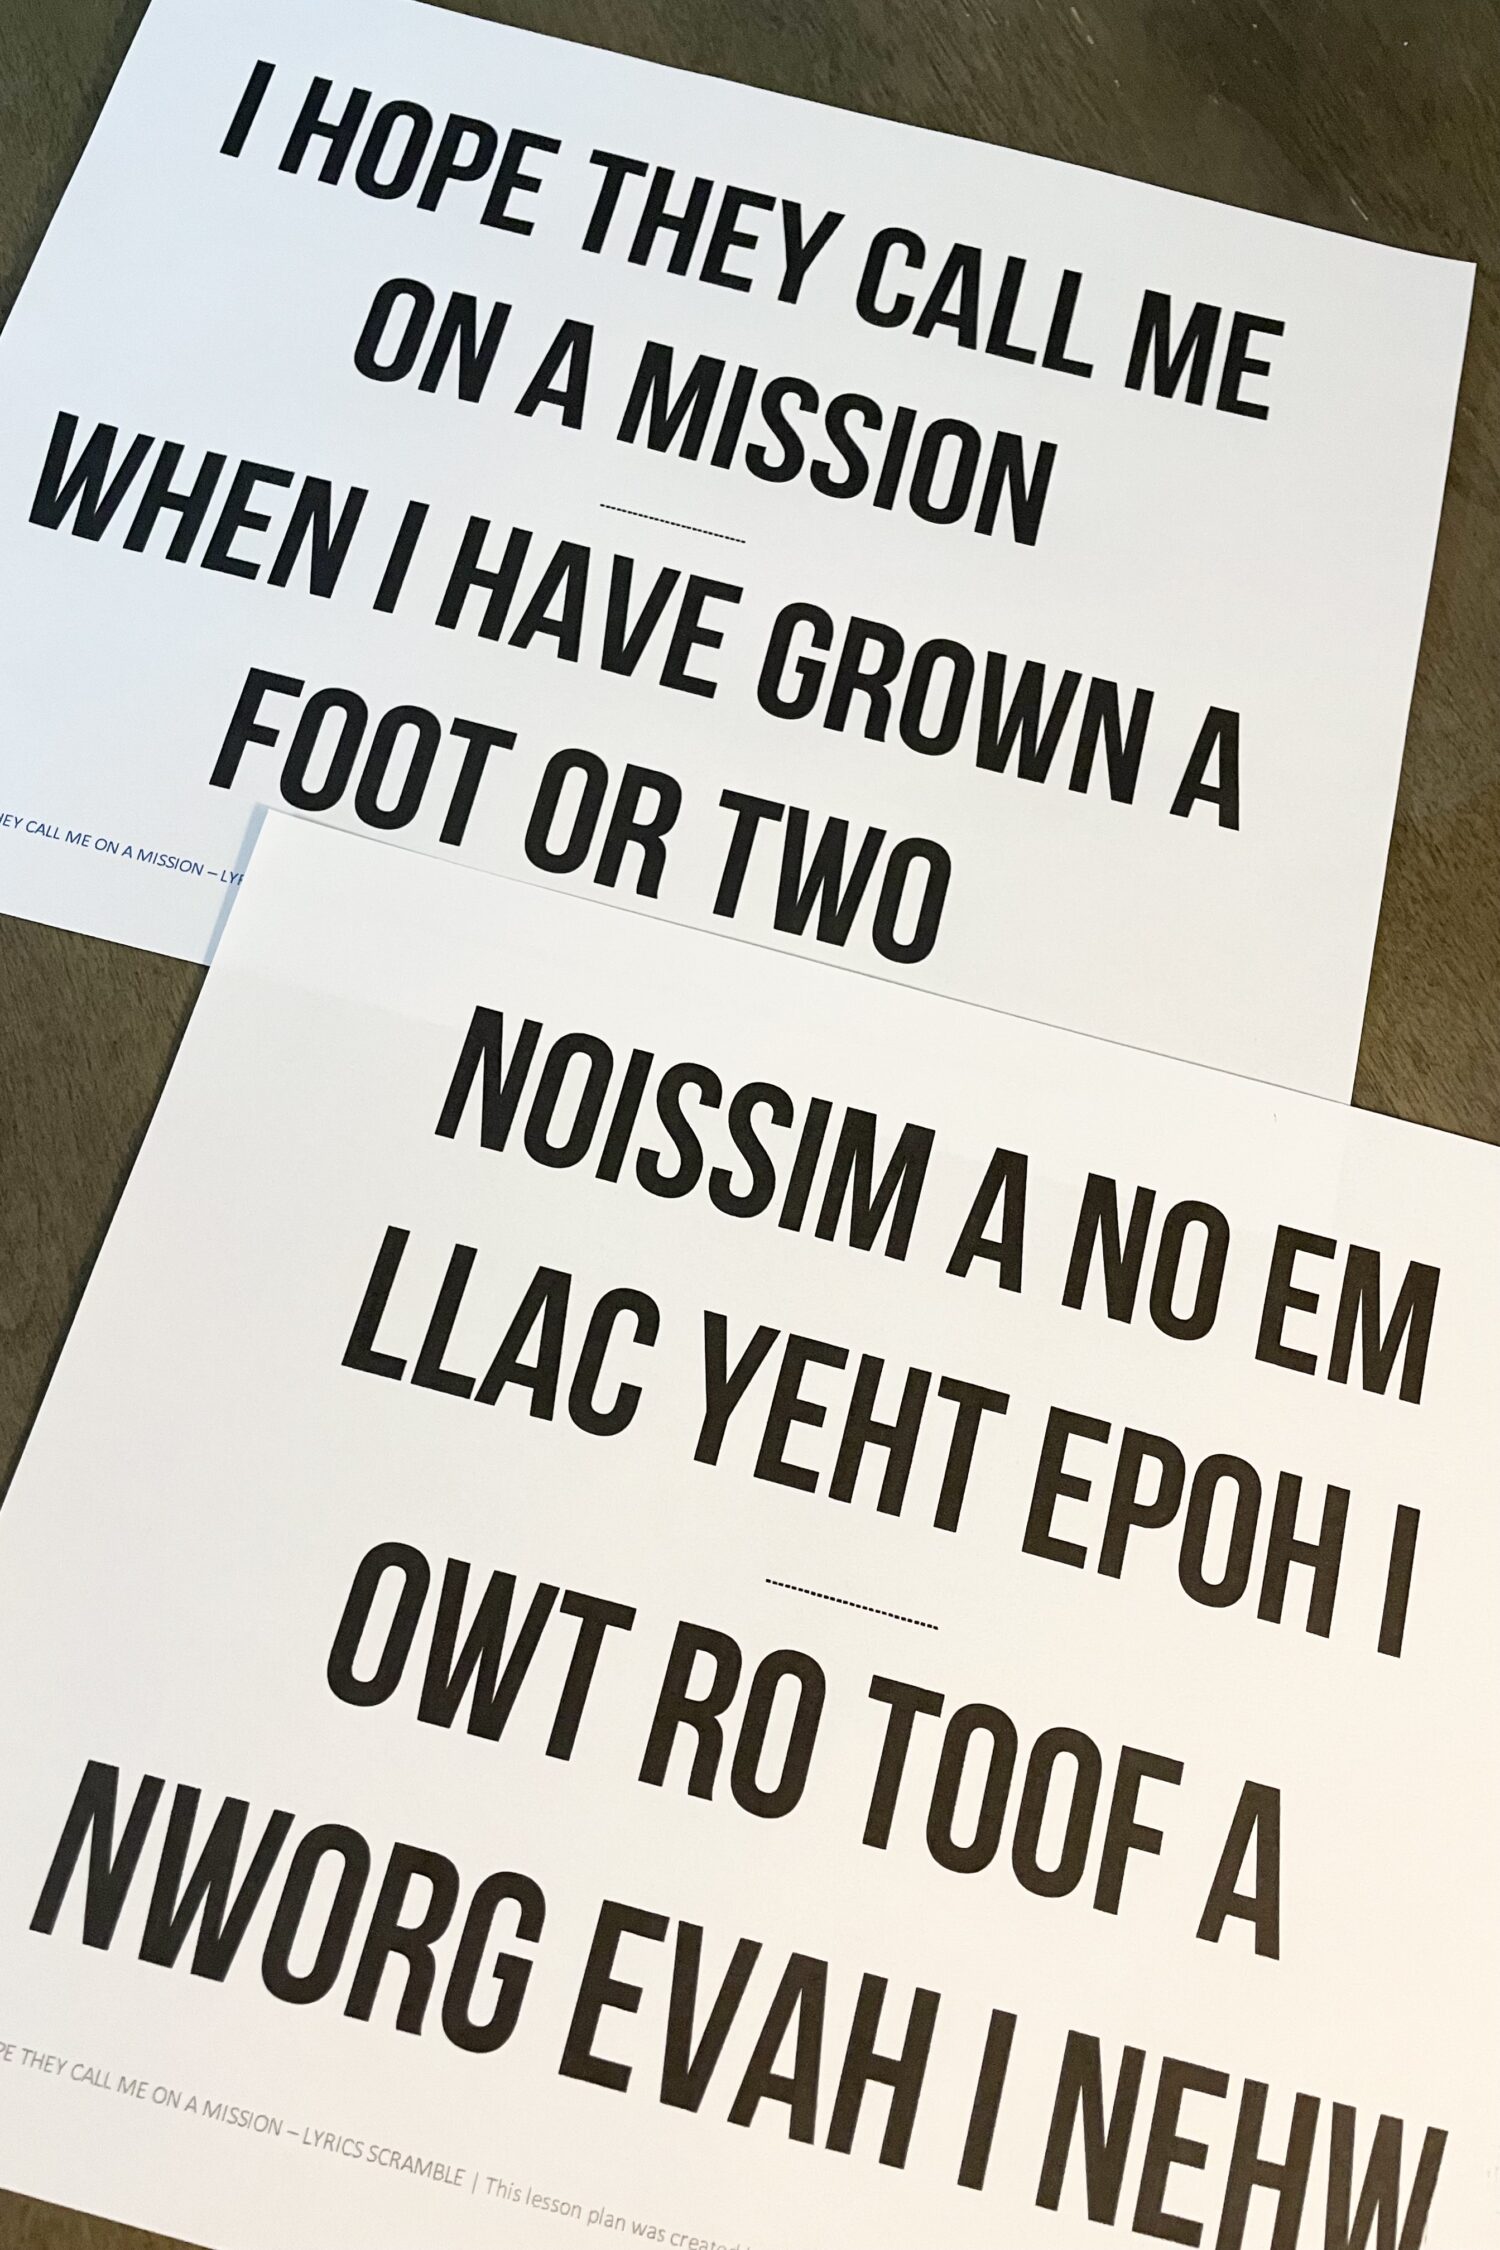 I Hope They Call Me On a Mission Lyrics Scramble Easy singing time ideas for Primary Music Leaders IMG 7313